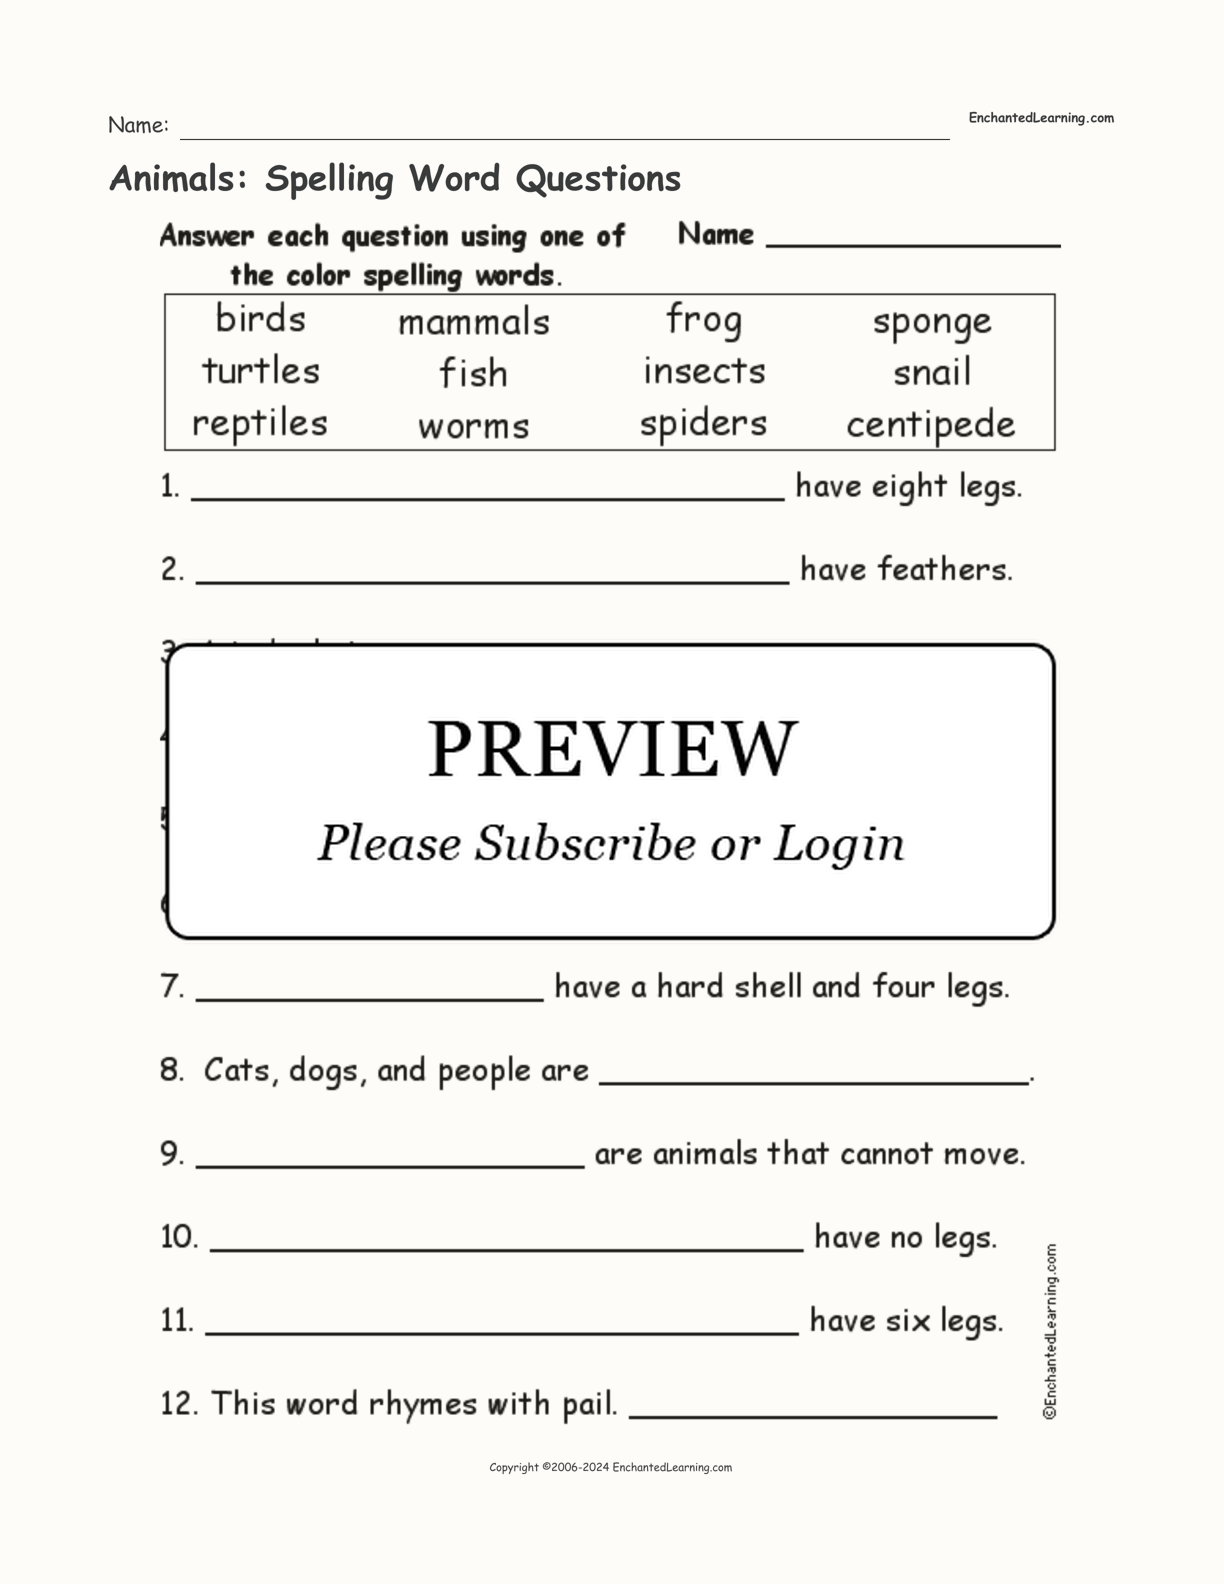 Animals: Spelling Word Questions interactive worksheet page 1